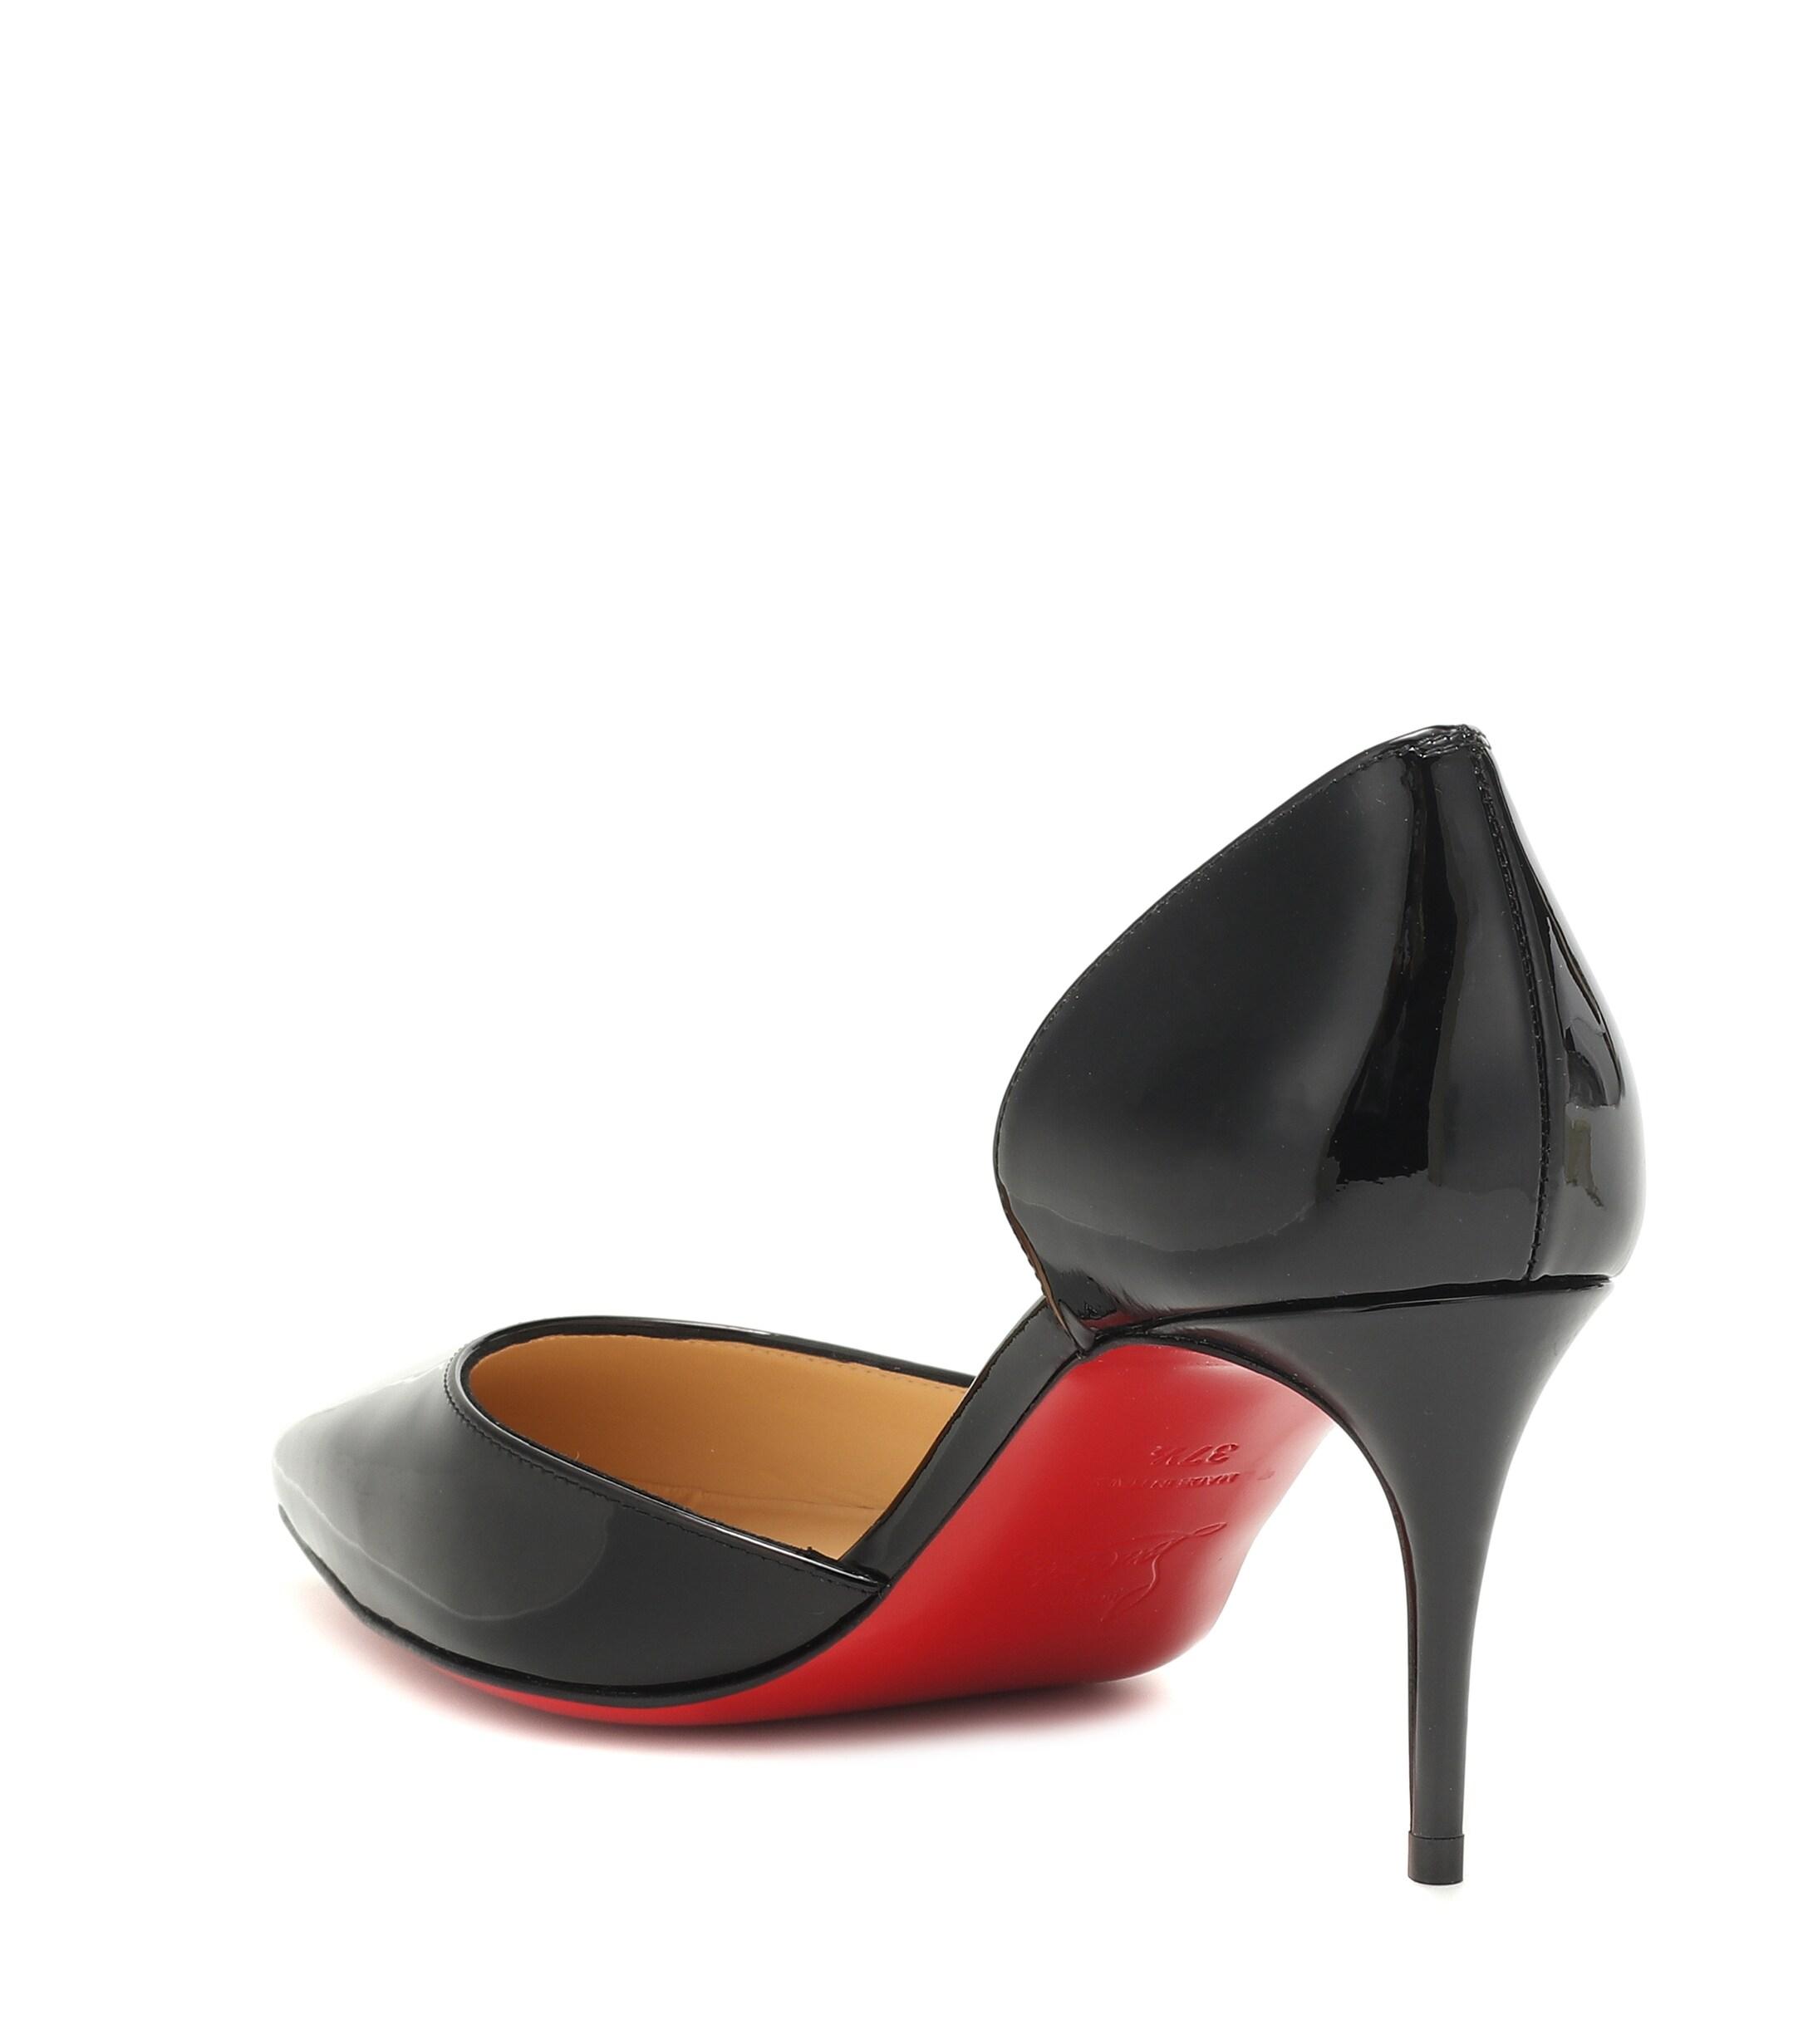 Christian Louboutin Iriza 70 Patent Leather Pumps in Black - Lyst